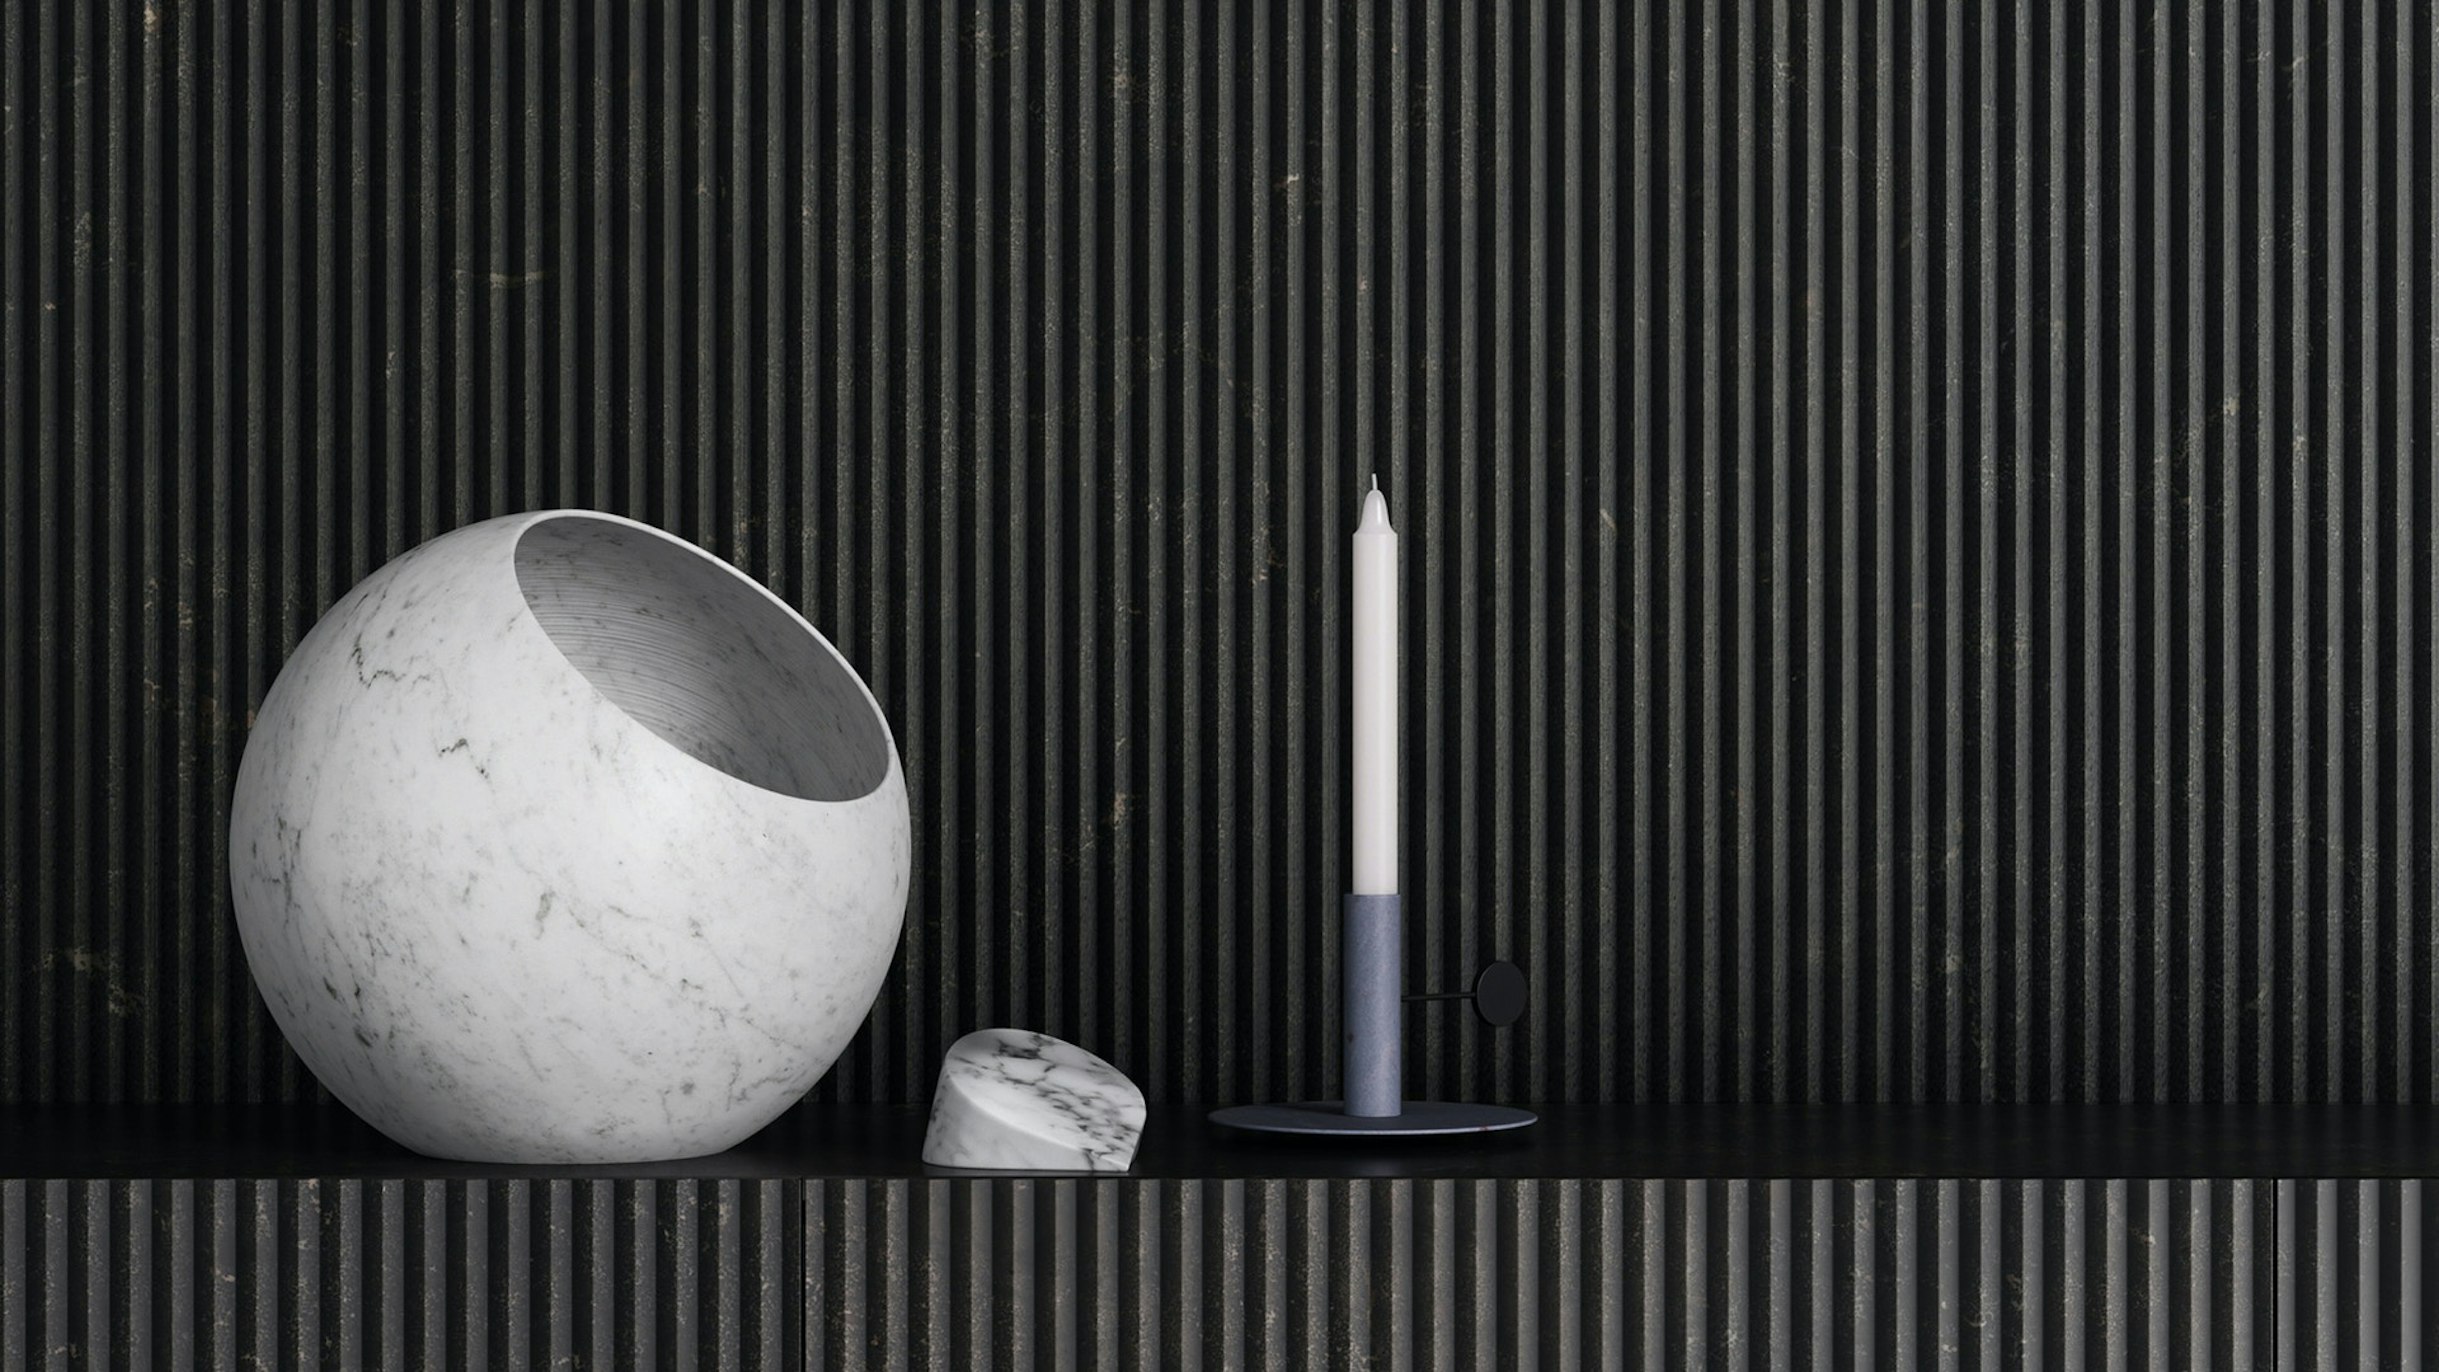 Bugia Candle holder | Interactive image